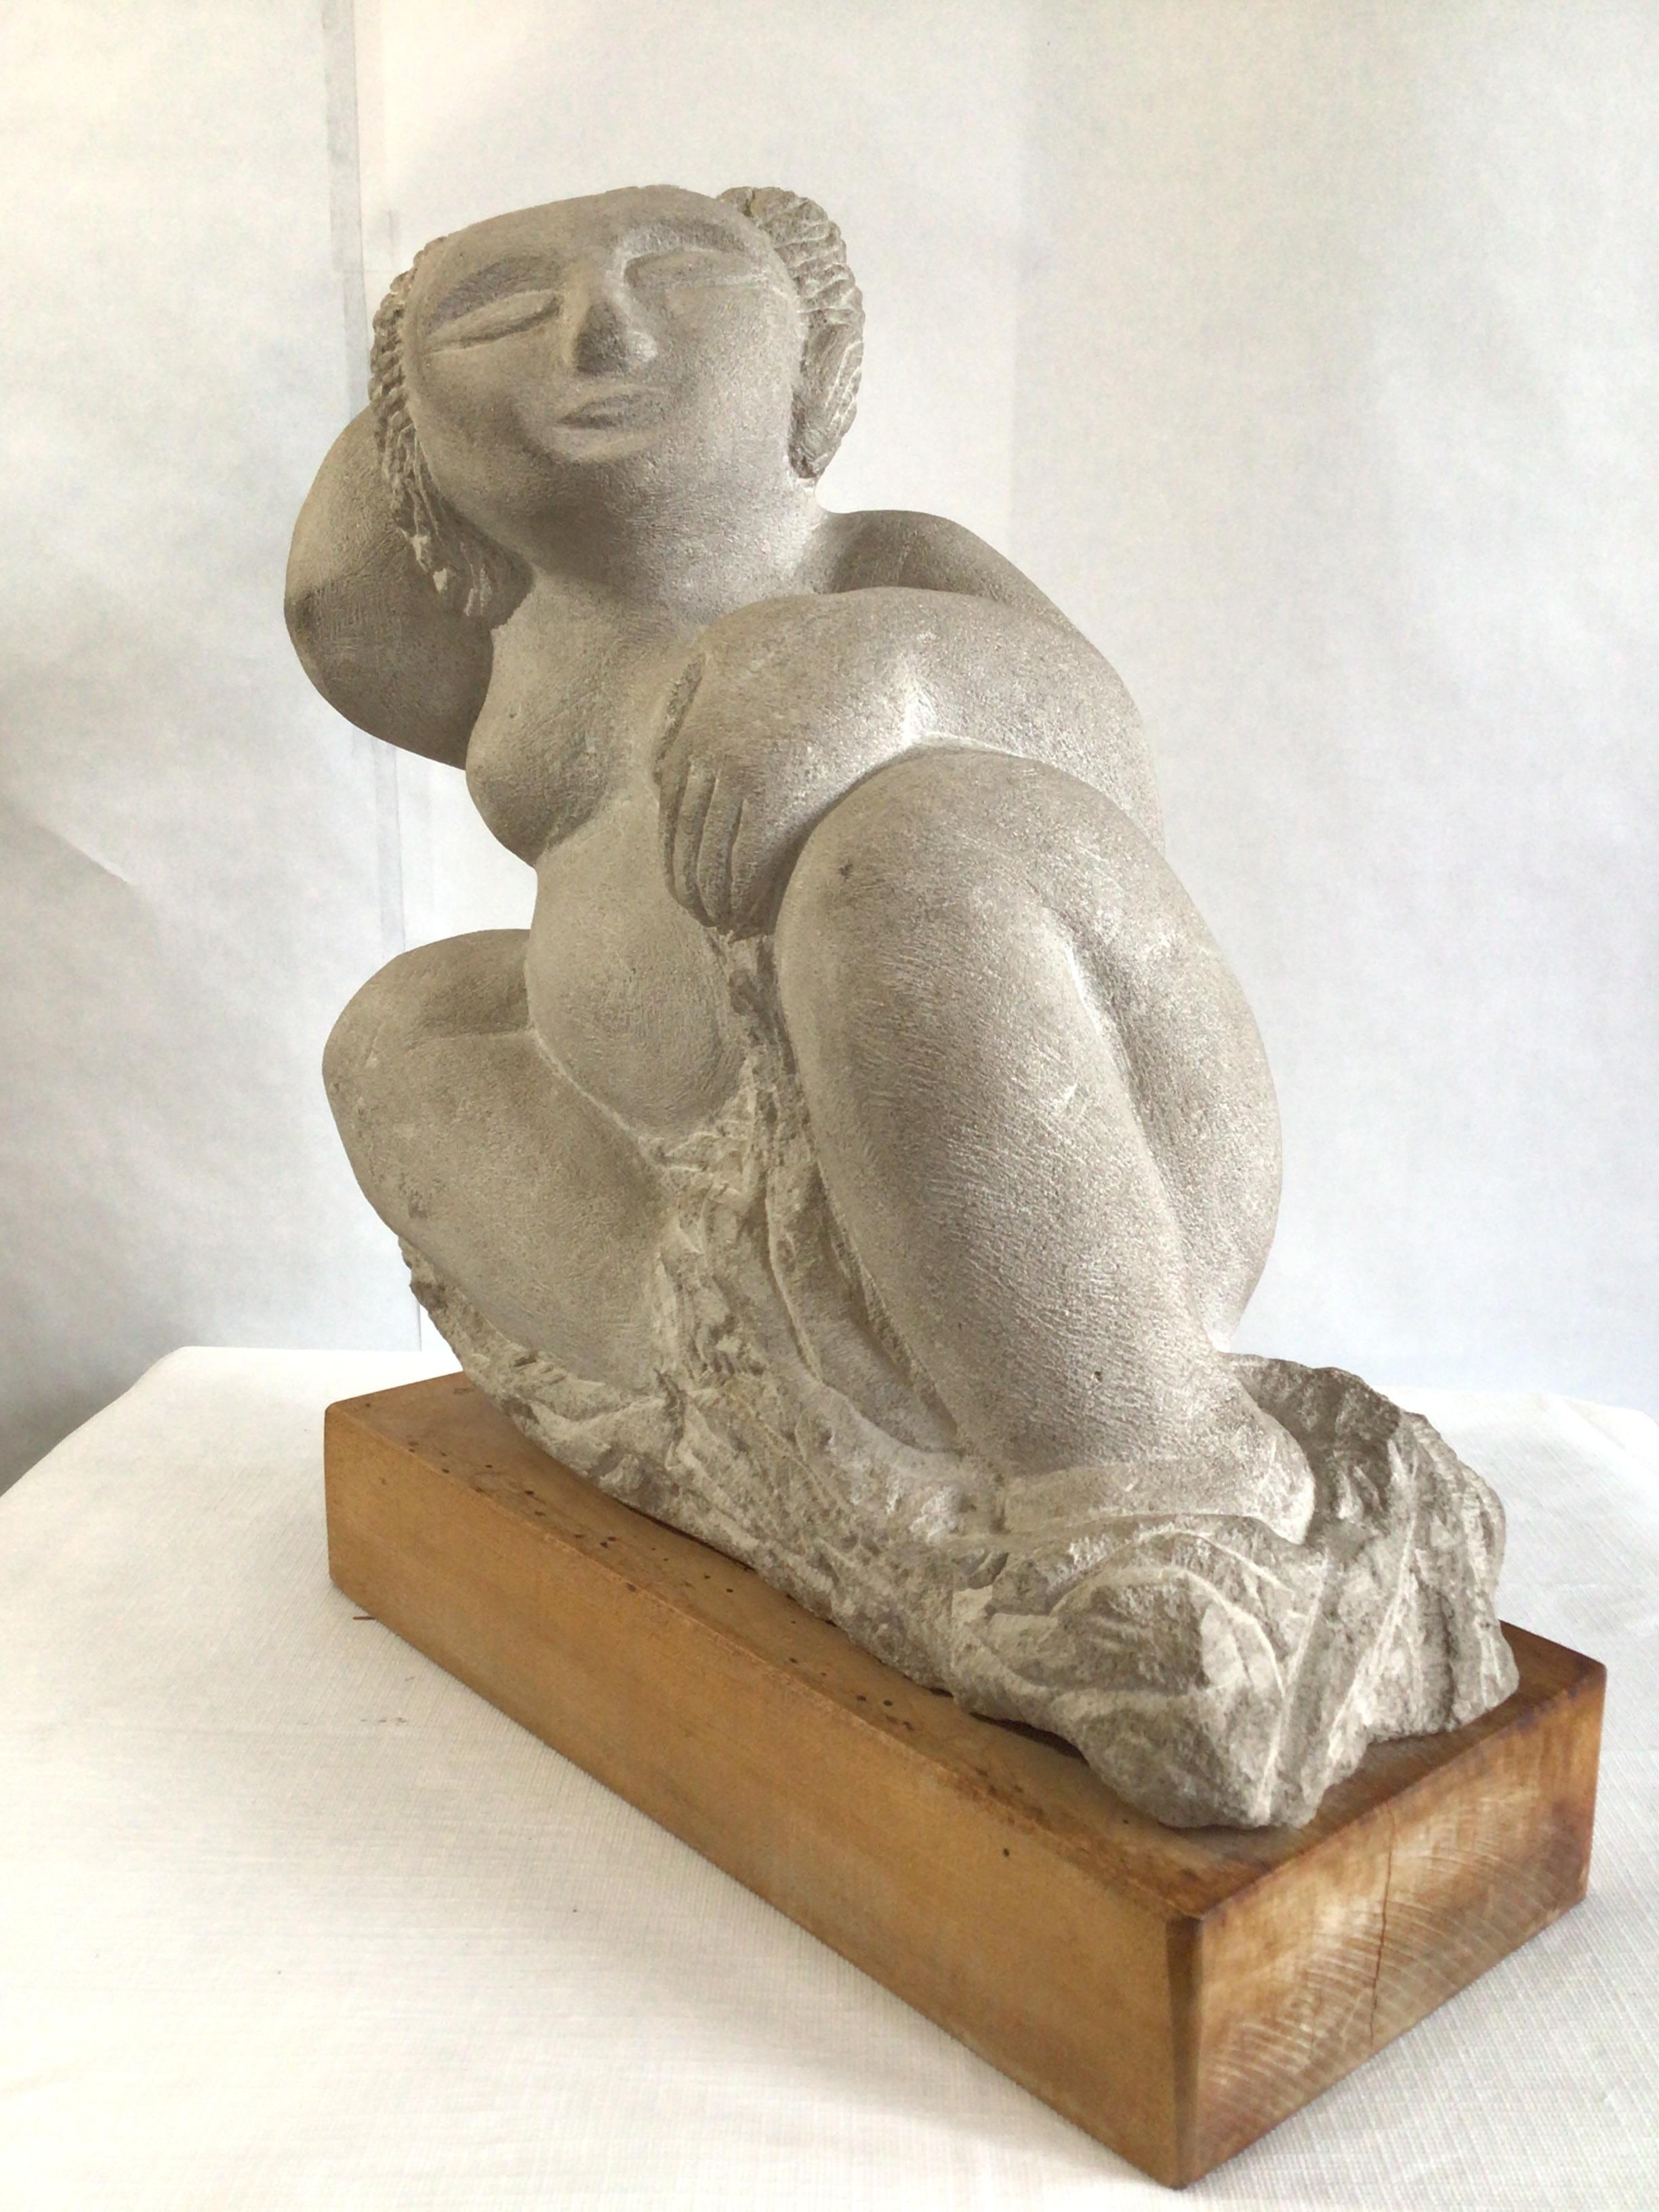 Beautiful 1970s stone sculpture of reclining voluptuous woman on a wooden base
Colors: White, Light Grey, Golden Wood.